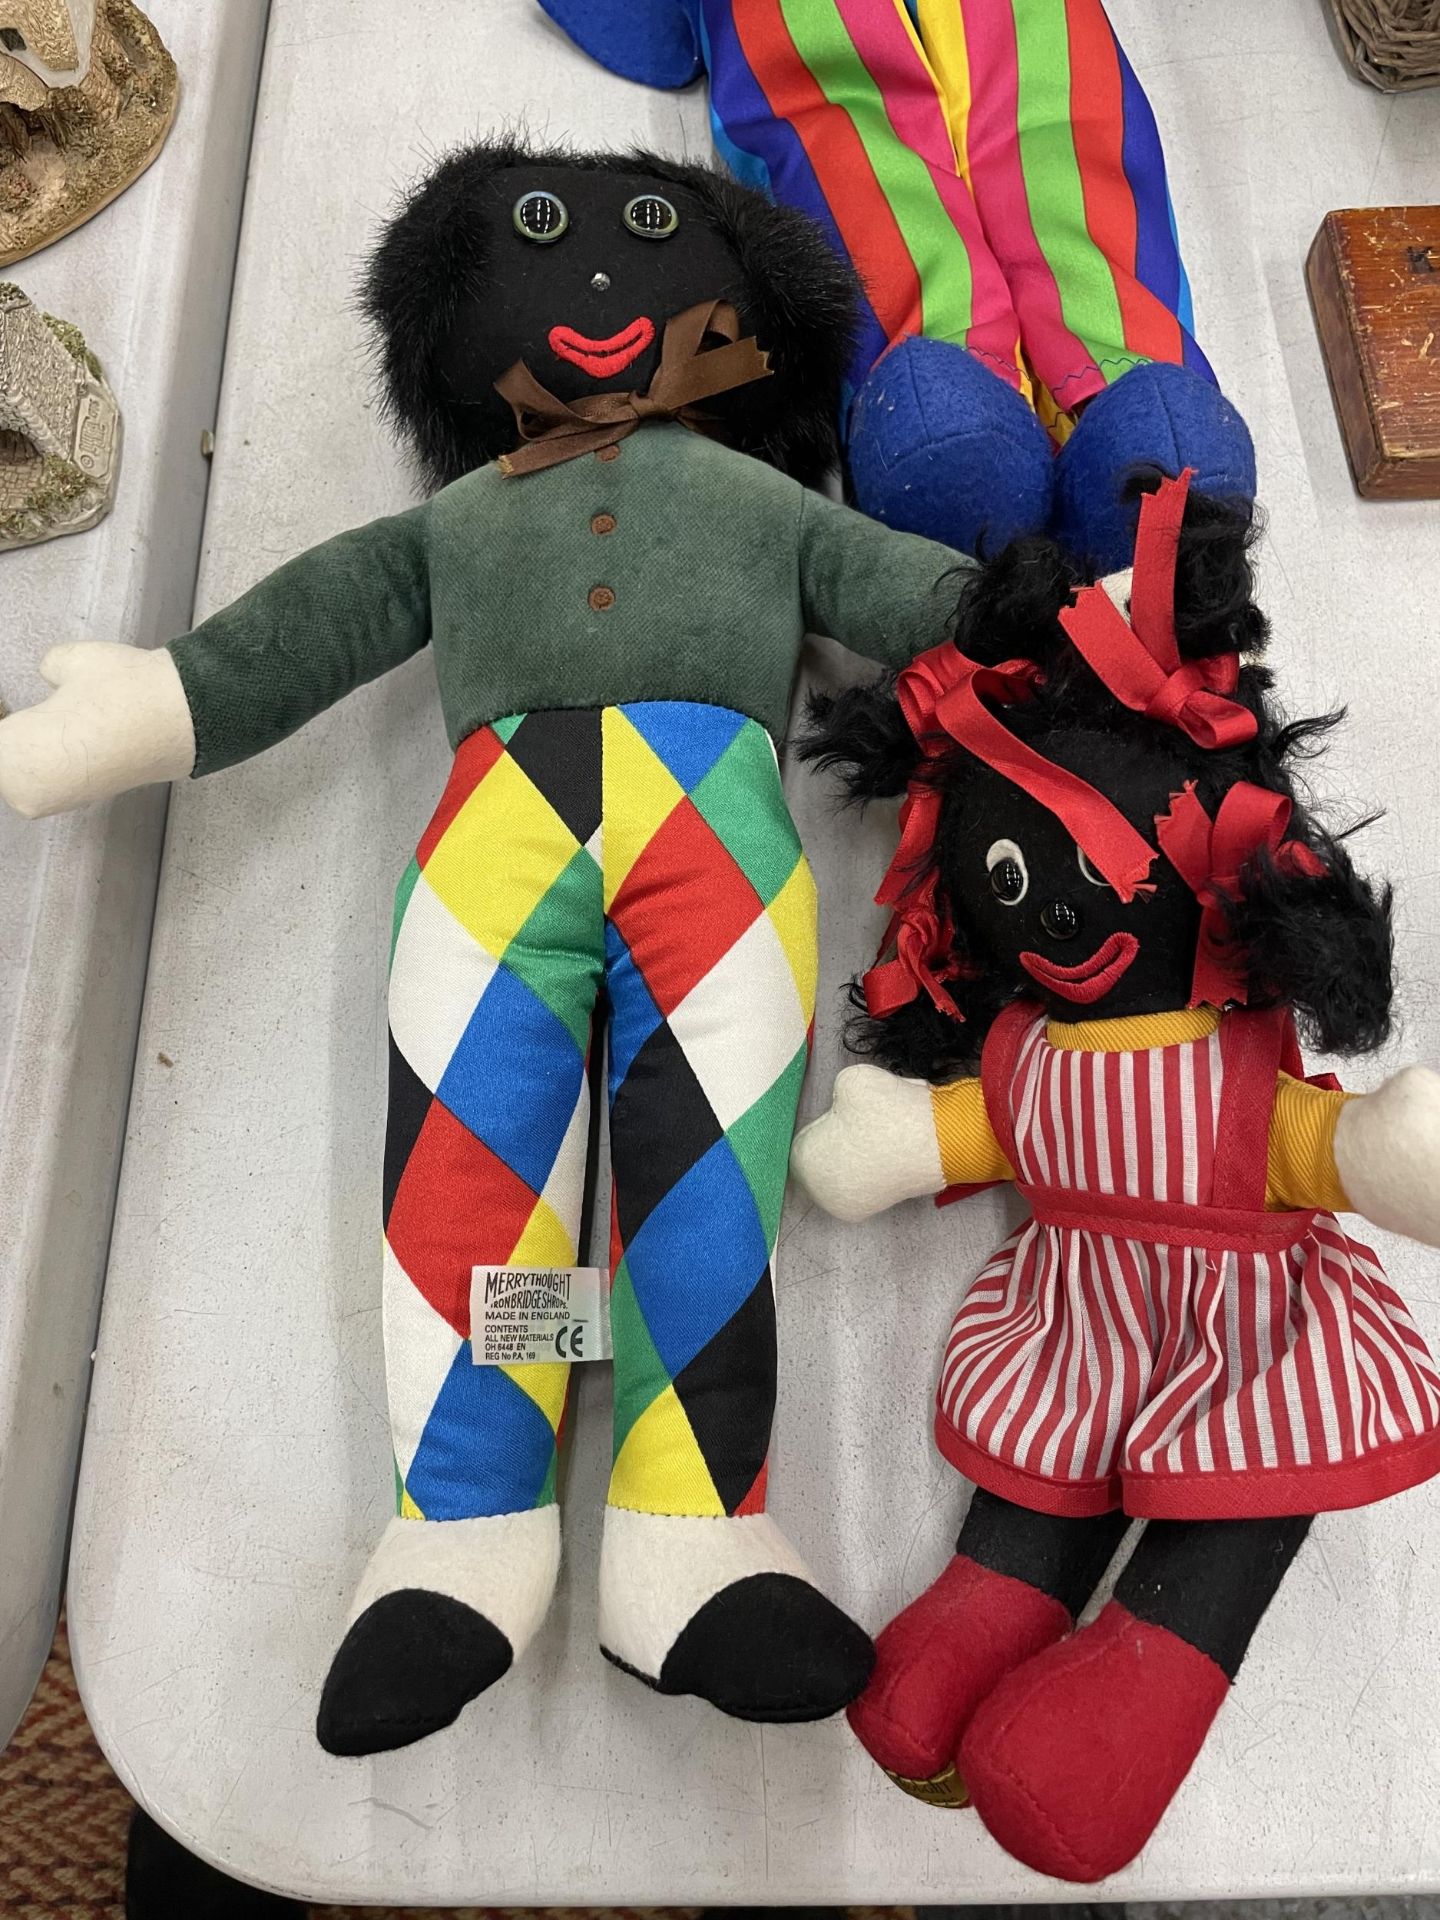 THREE VINTAGE ROBERTSONS JAM SOFT TOY FIGURES, TWO BEING MERRYTHOUGHT - Image 2 of 5